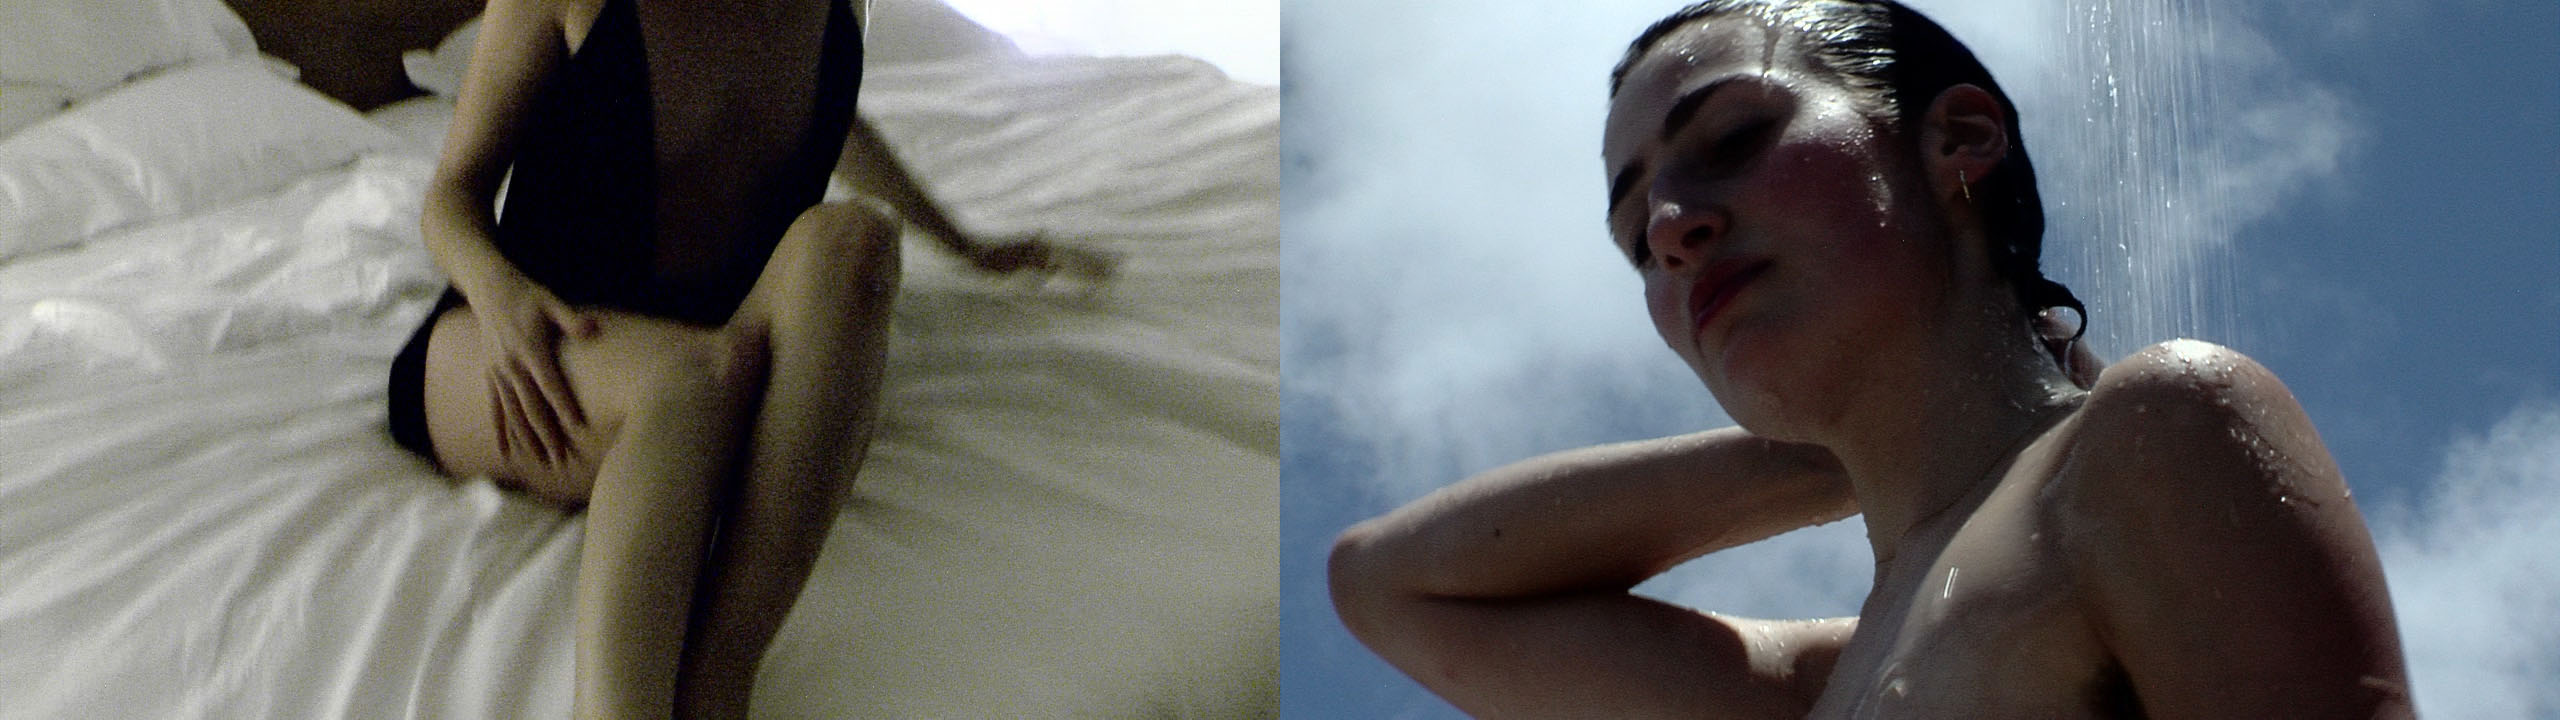 Left: Independent escort Niki Blau wears a short black dress and sits with naked bent legs in the white sheets of a hotel bed. Her head is cut off. Right: Niki Blau from frog perspective taking a shower outside. In the background a slightly cloudy blue sky.